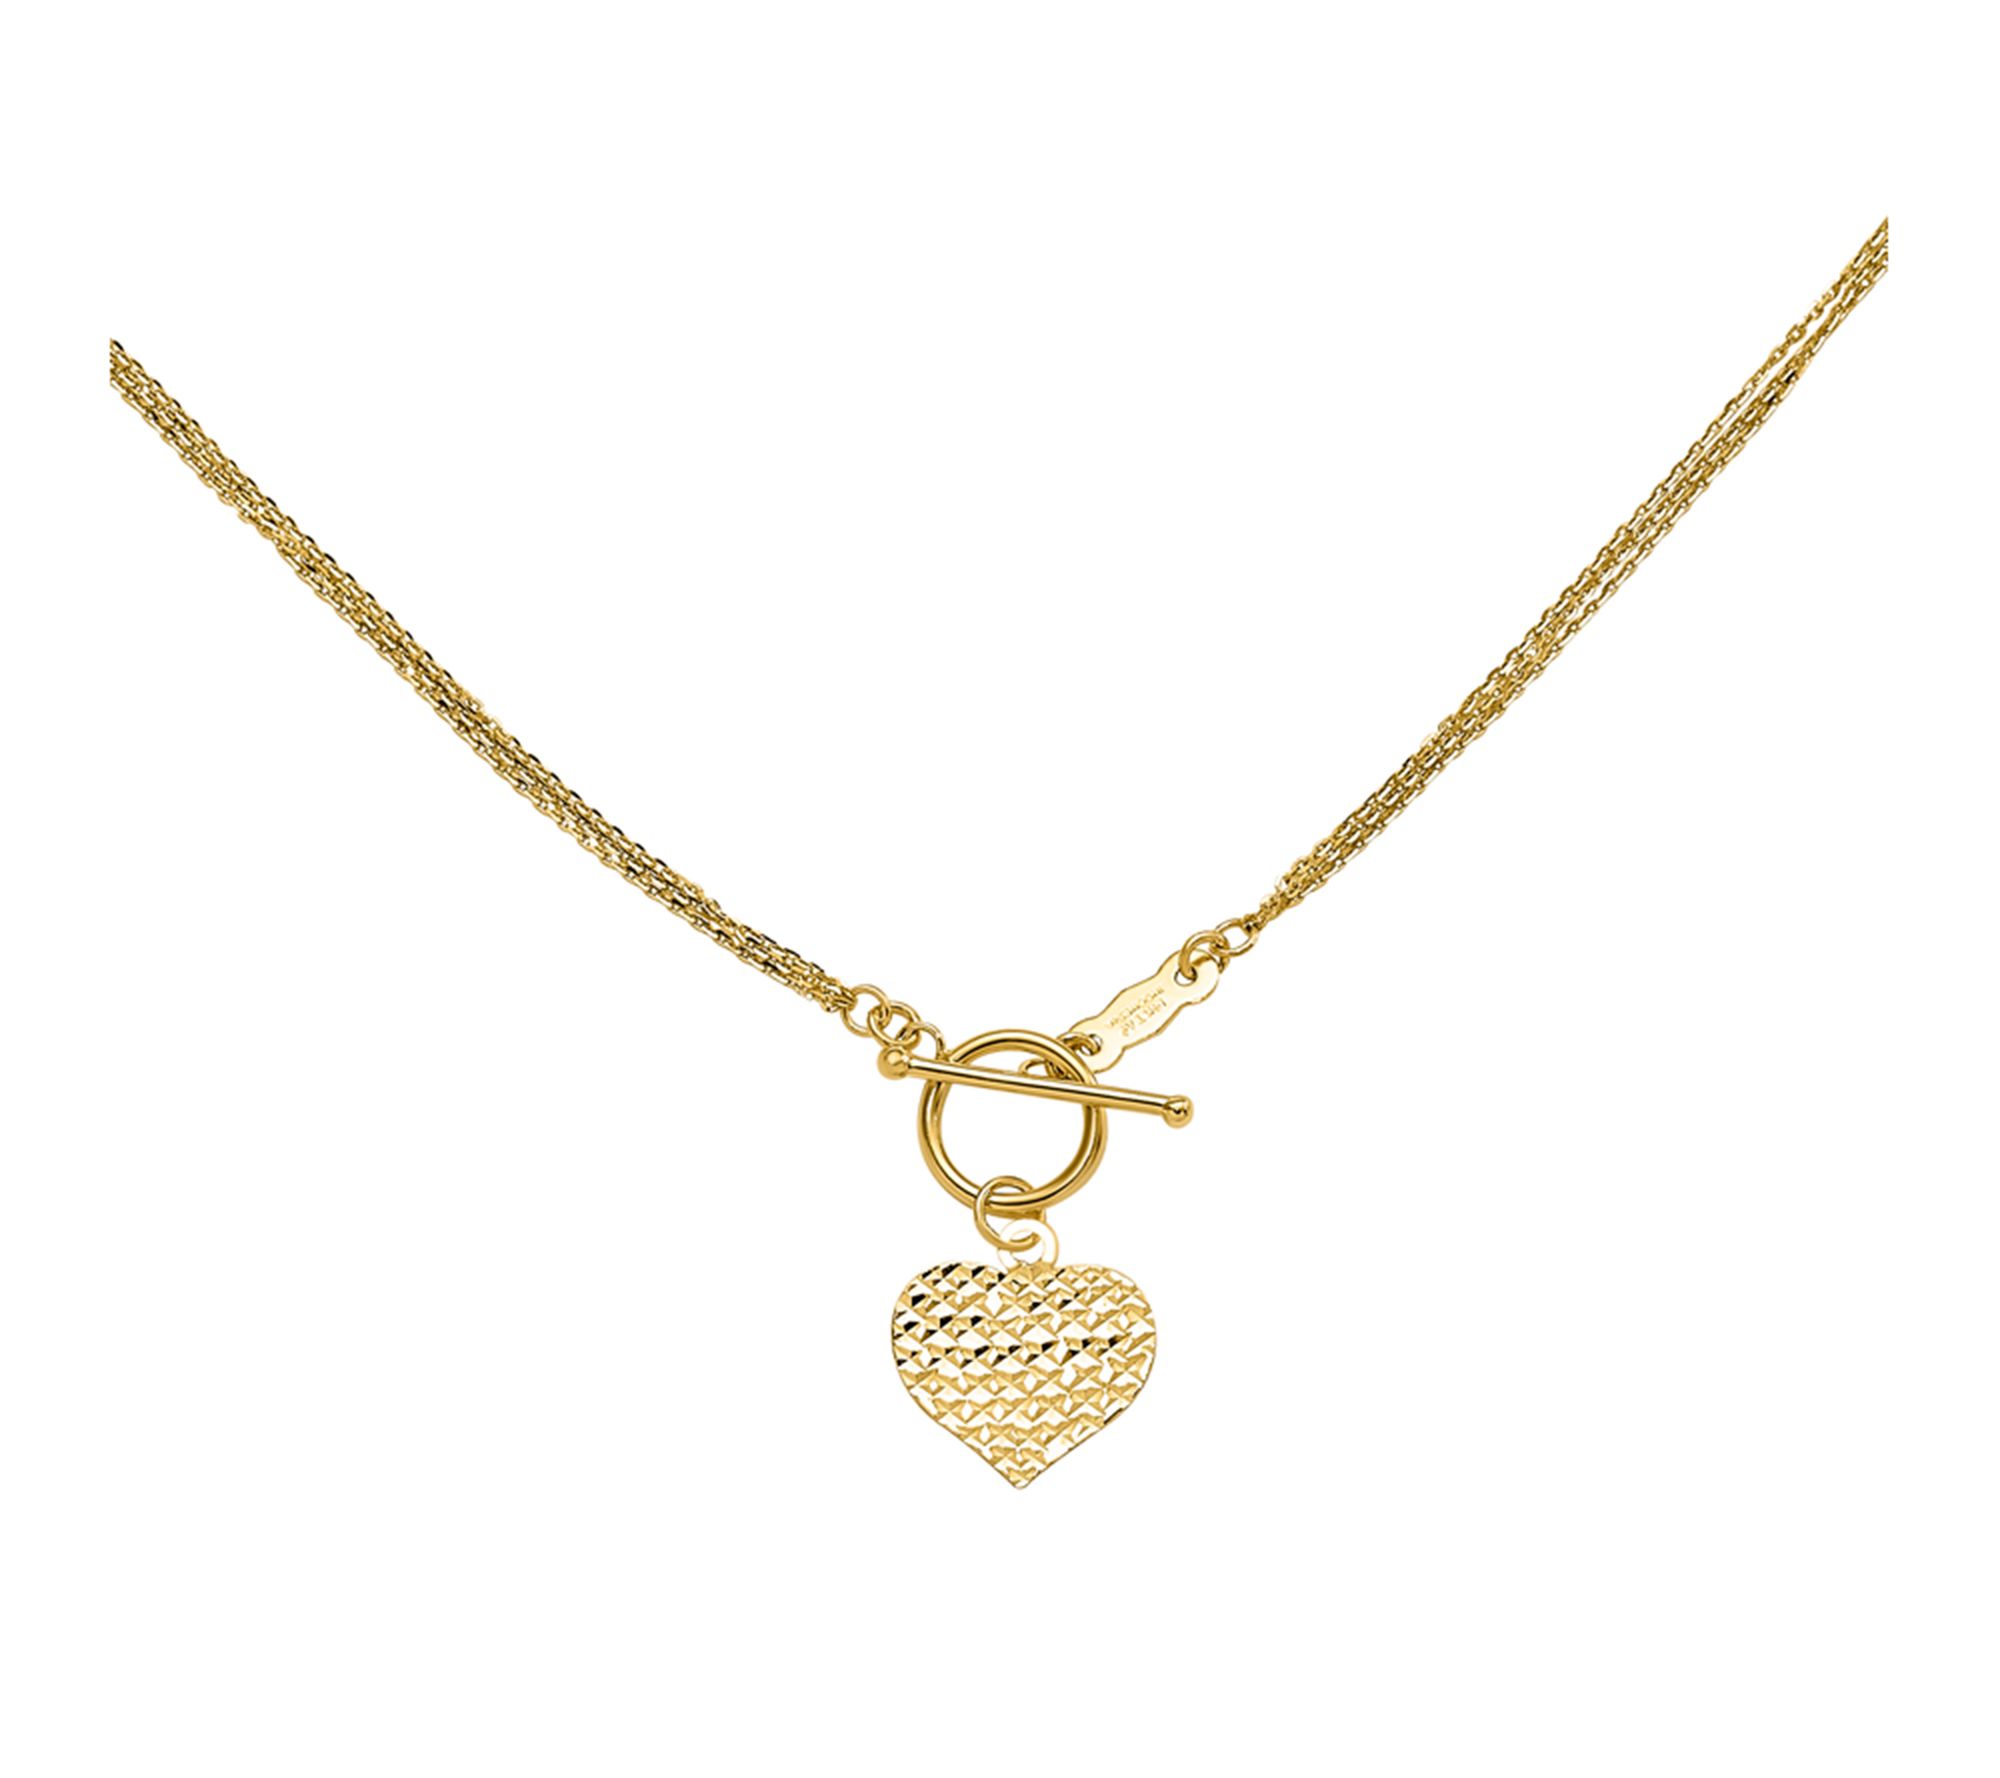 14K Gold Textured Heart Toggle Necklace, 2.0g - QVC.com